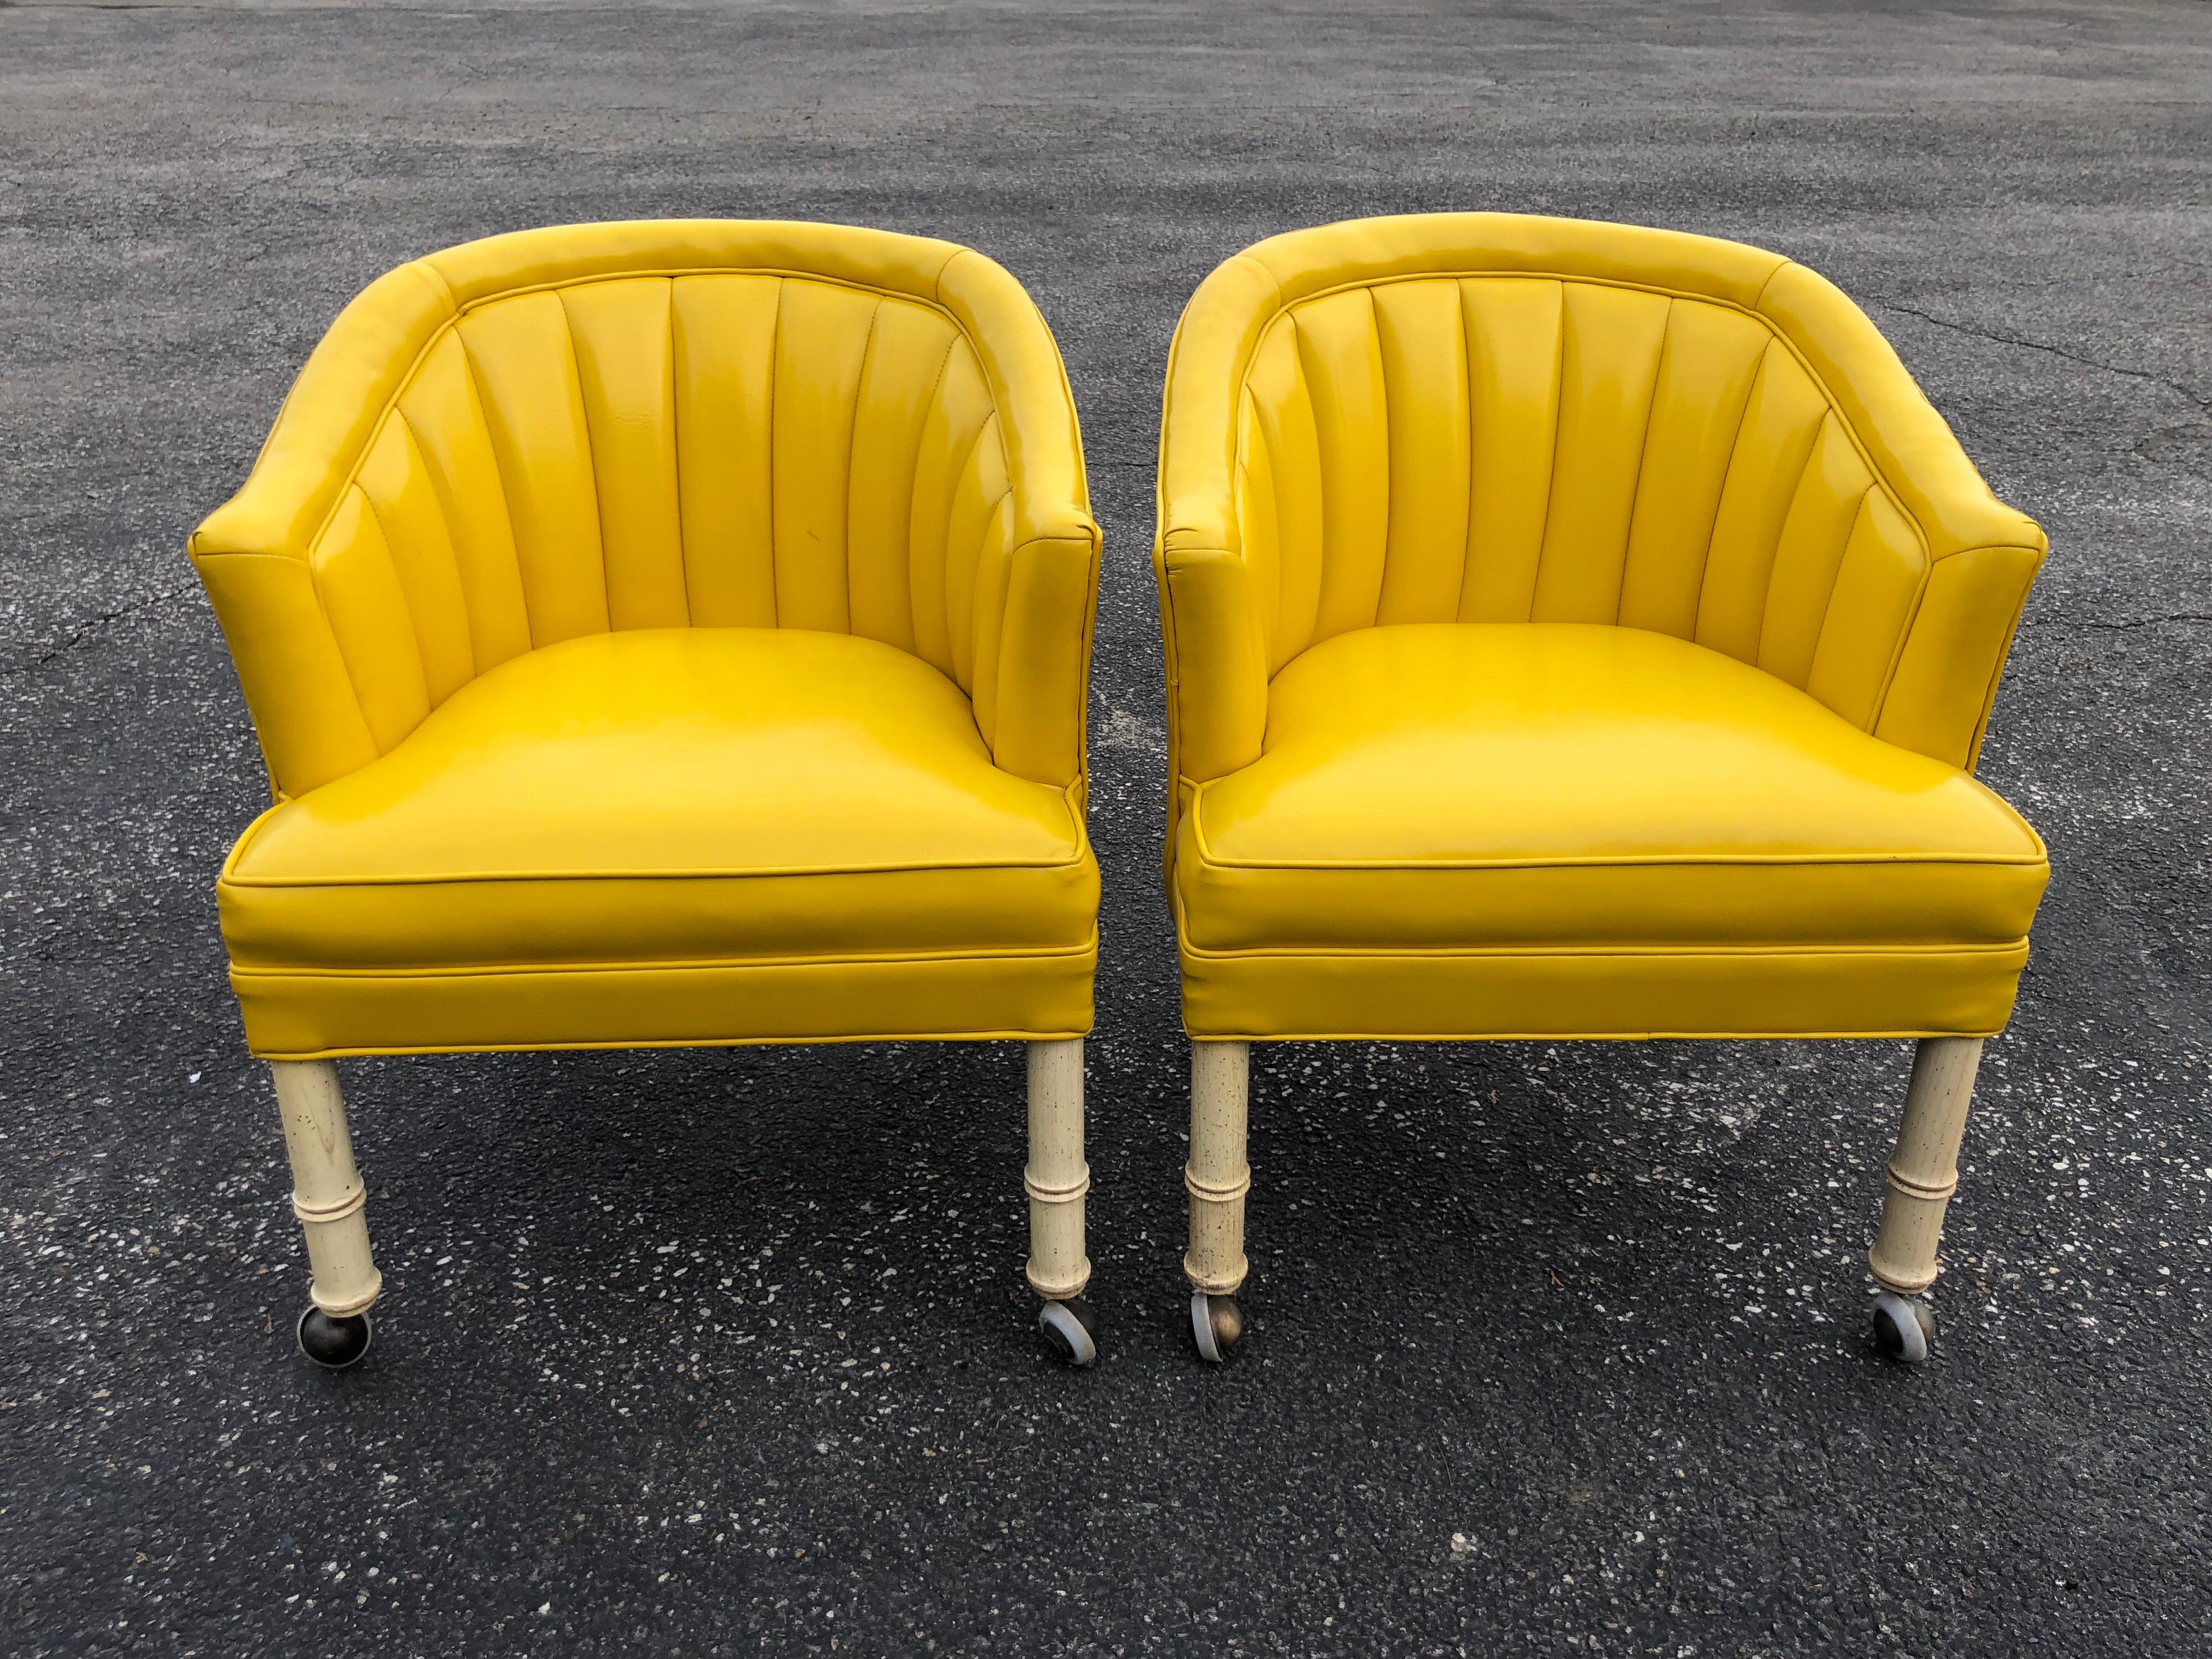 Pair of yellow channel back vinyl chairs on castors. Off-white faux bamboo legs with brass castors. Glam up that dressing room or home office with these crazy cool chairs. Measures: Total width is 25.25, total height is 29.75, total depth is 24.50,